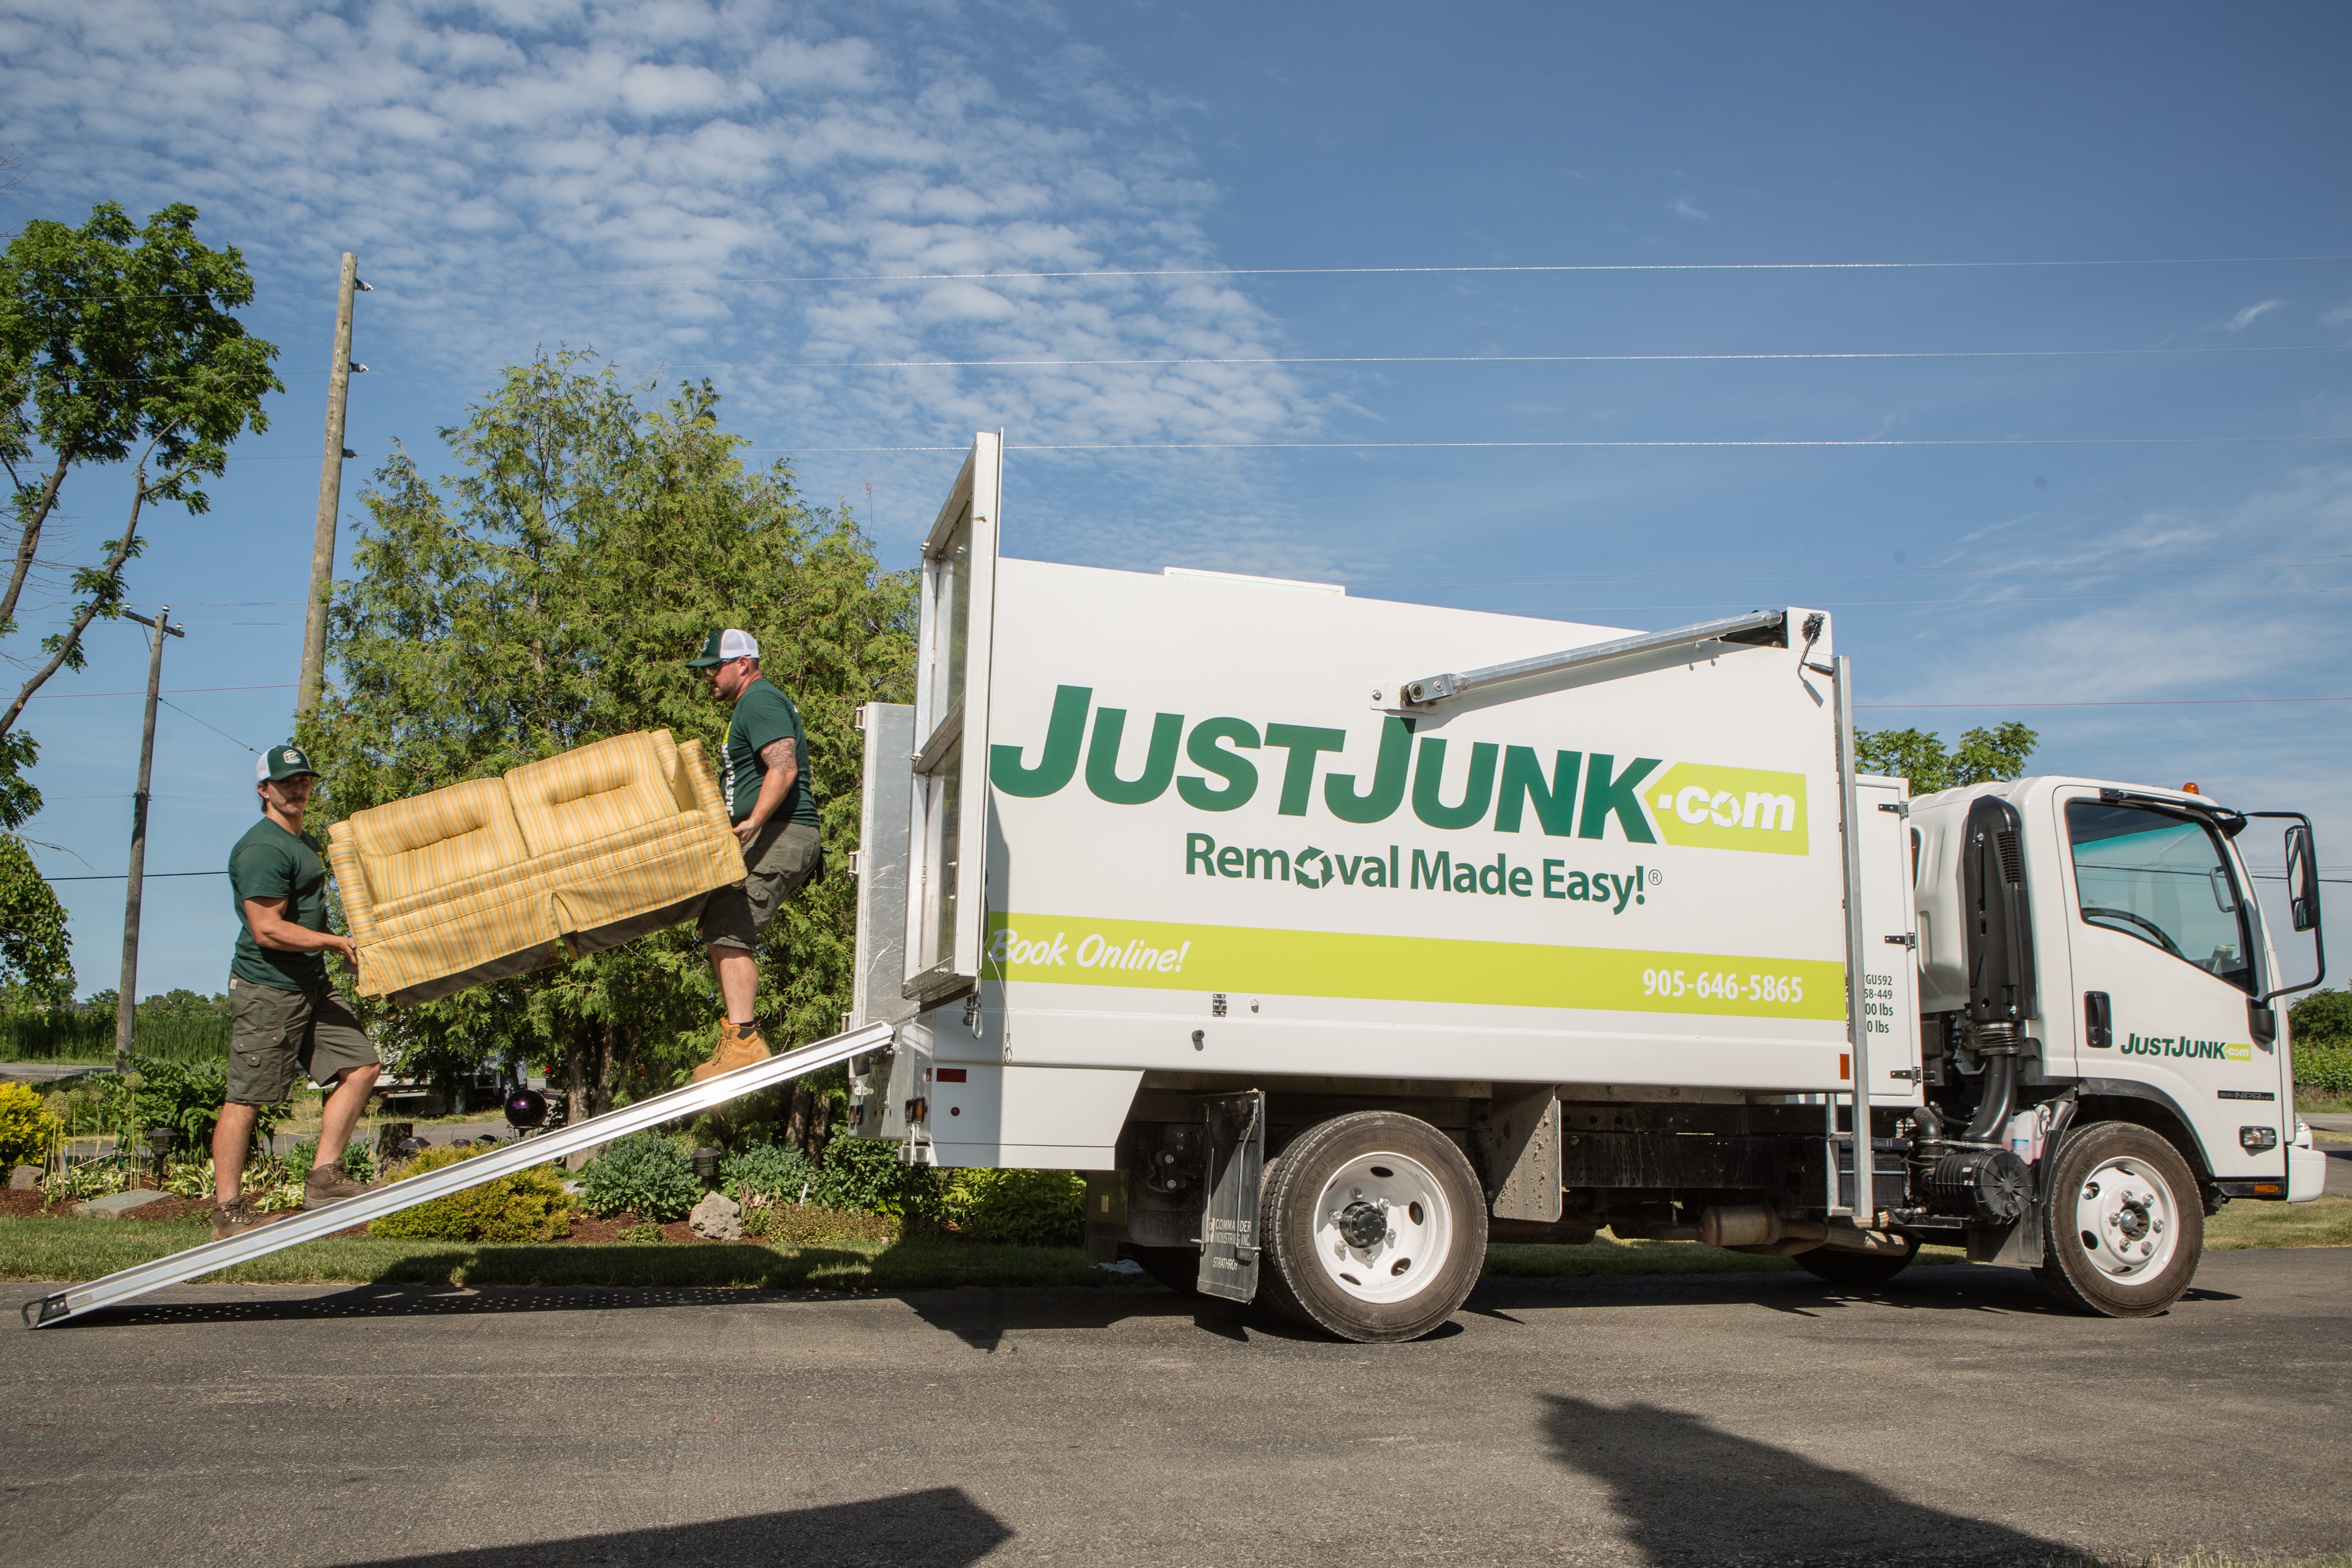 Just Junk - Junk Removal and Downsizing